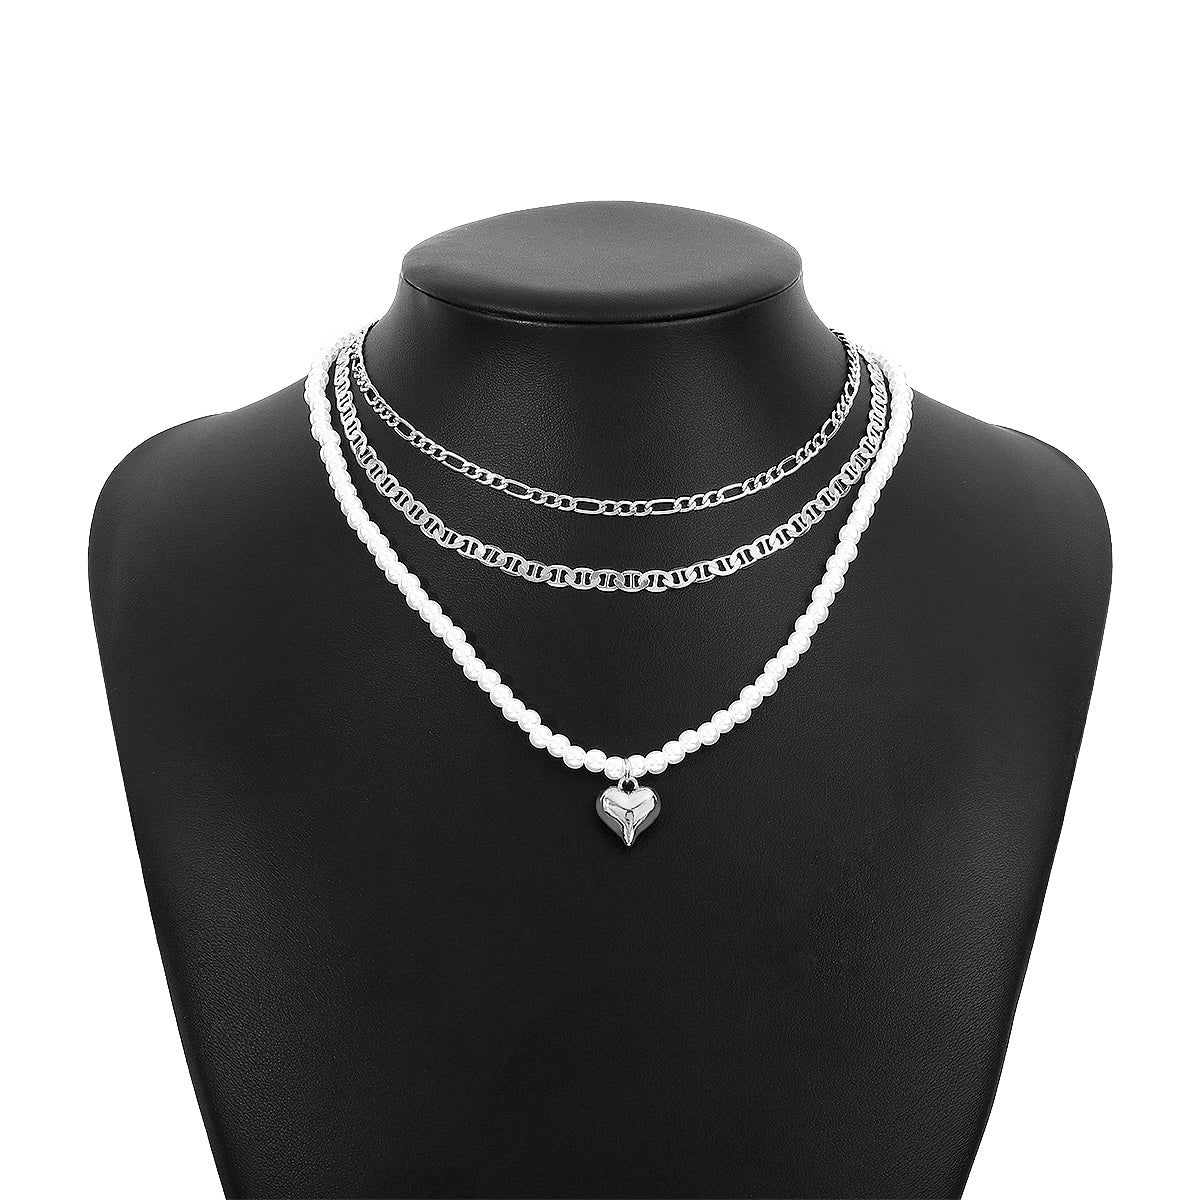 Pearl & Silver-Plated Heart Pendant Necklace Set